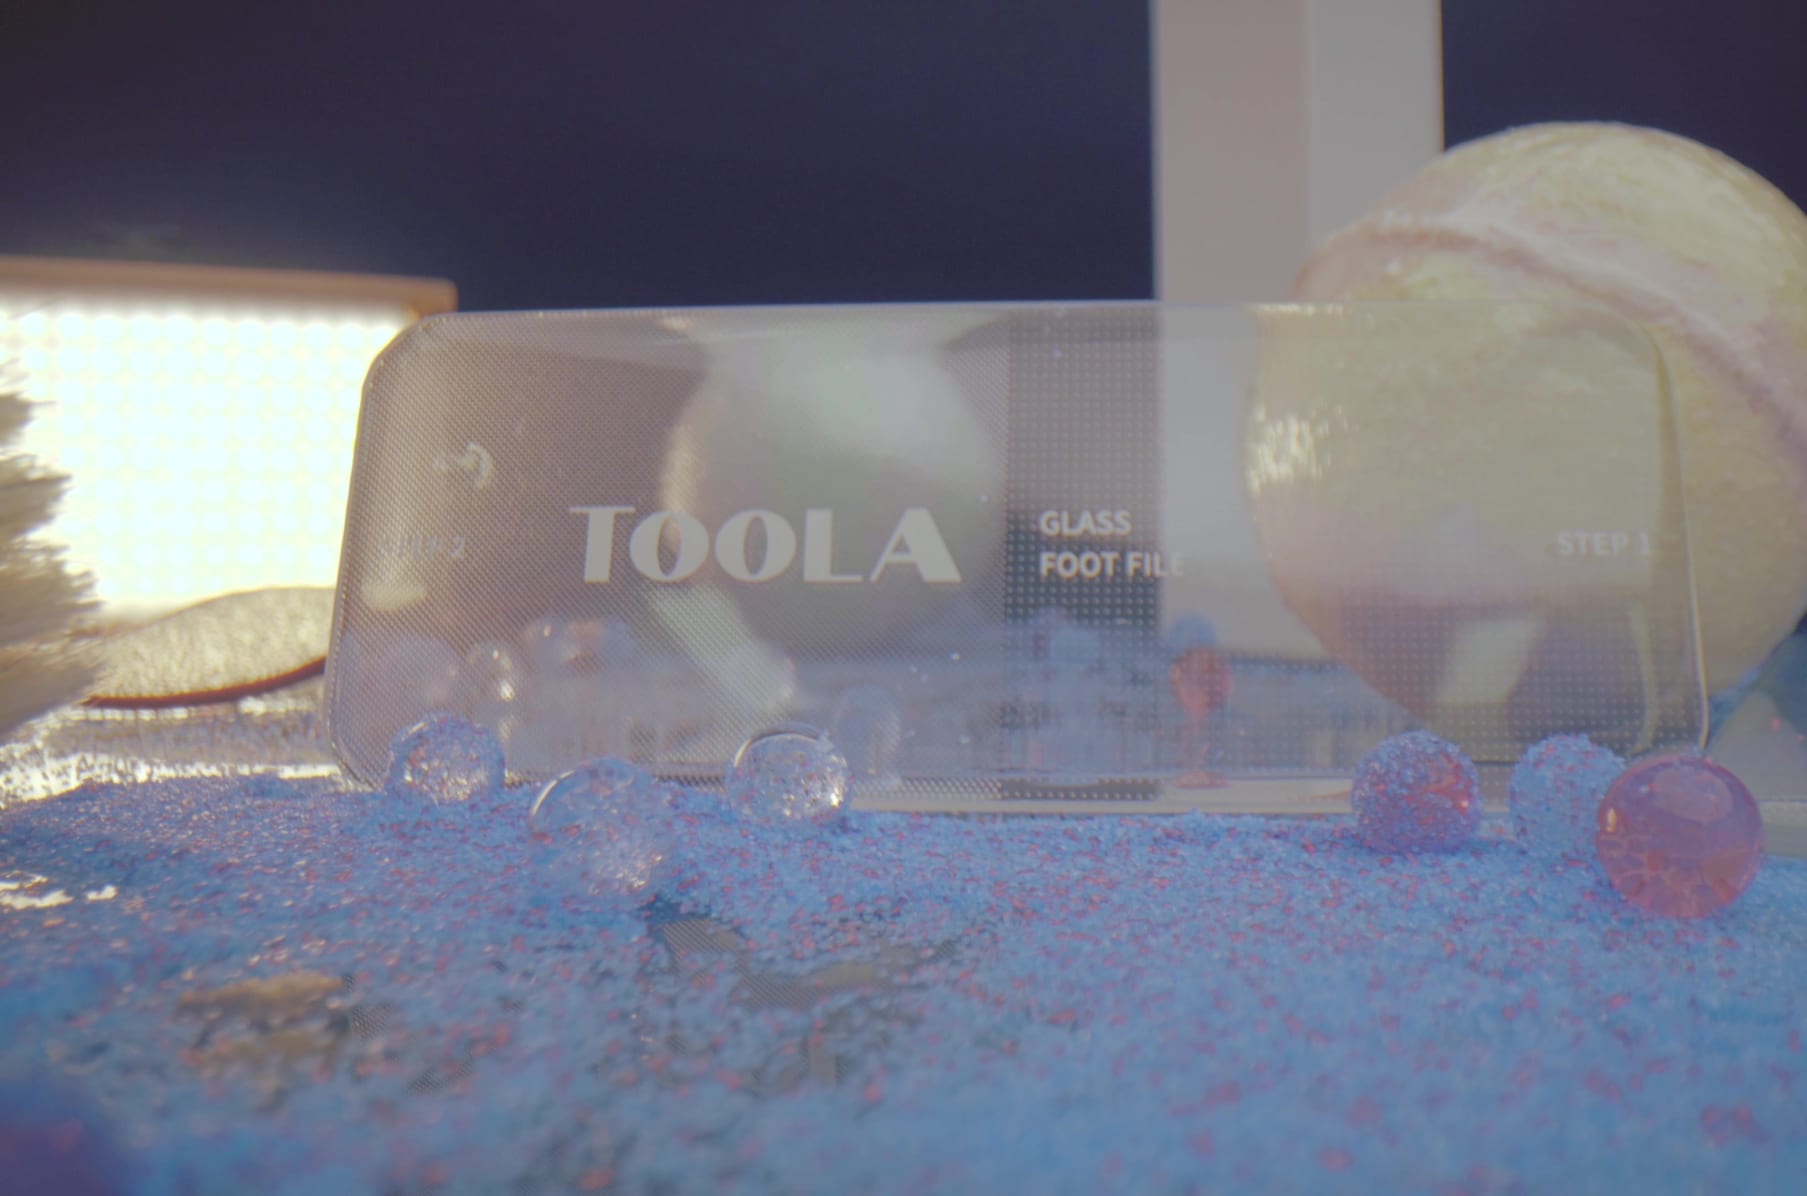 TOOLA - GLASS FOOT FILE - Kmall24